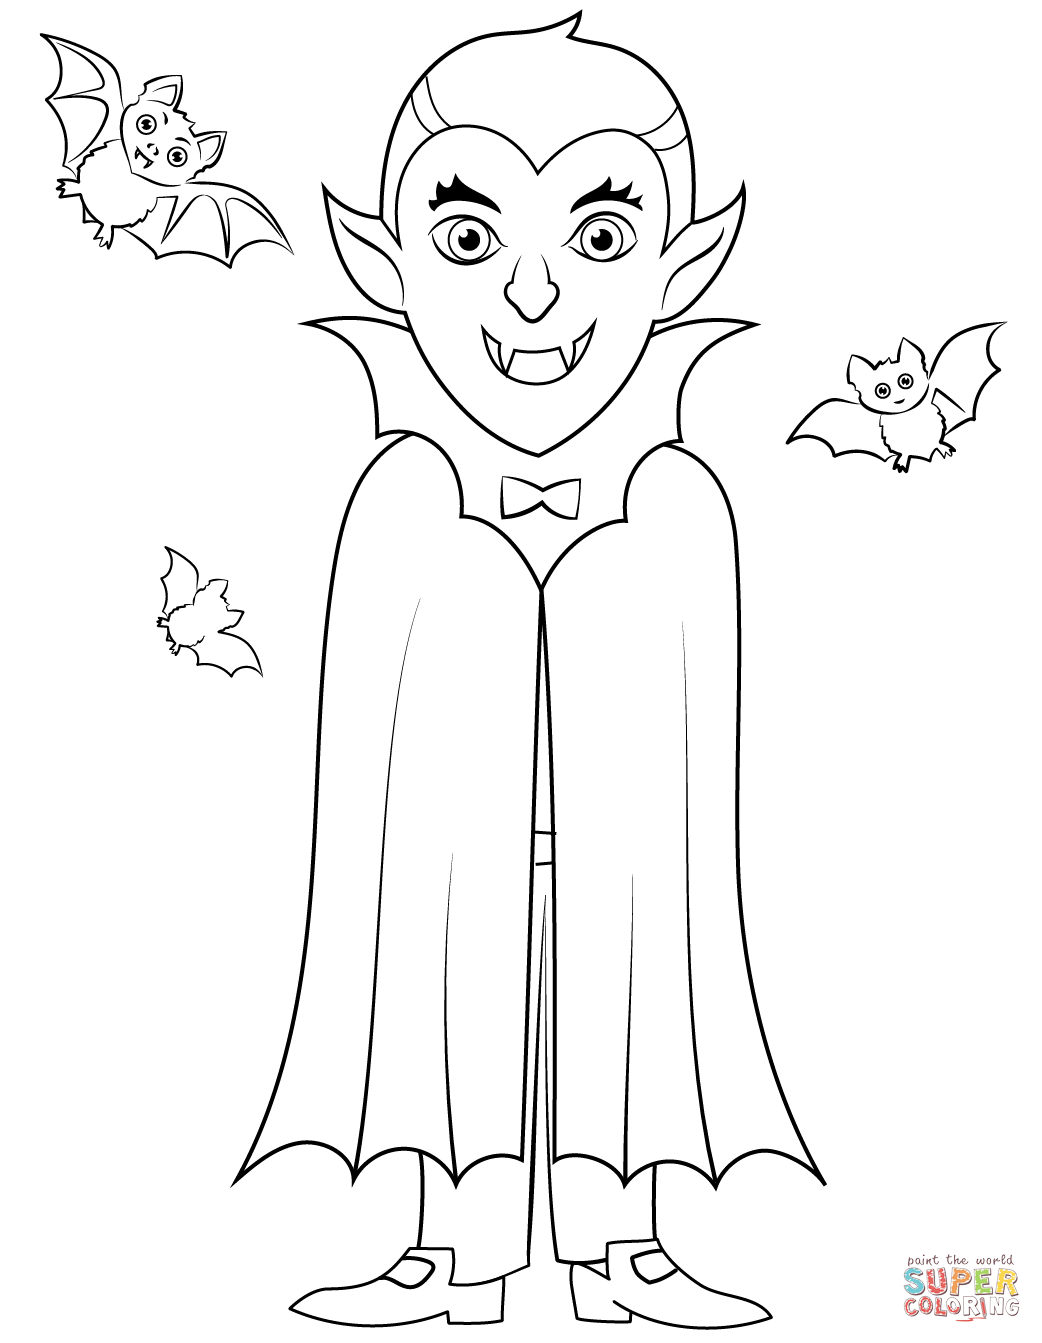 Dracula coloring page free printable coloring pages